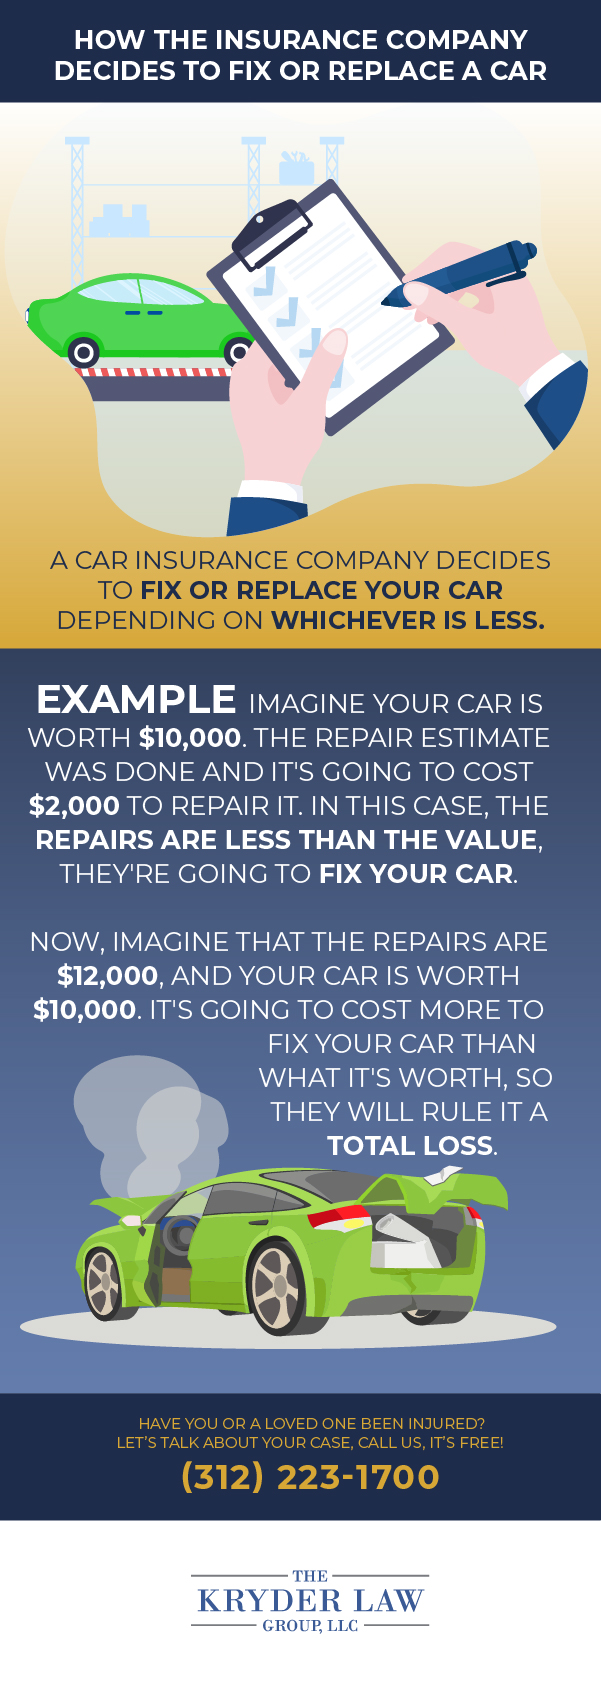 How the Insurance Company Decides to Fix or Replace a Car Infographic